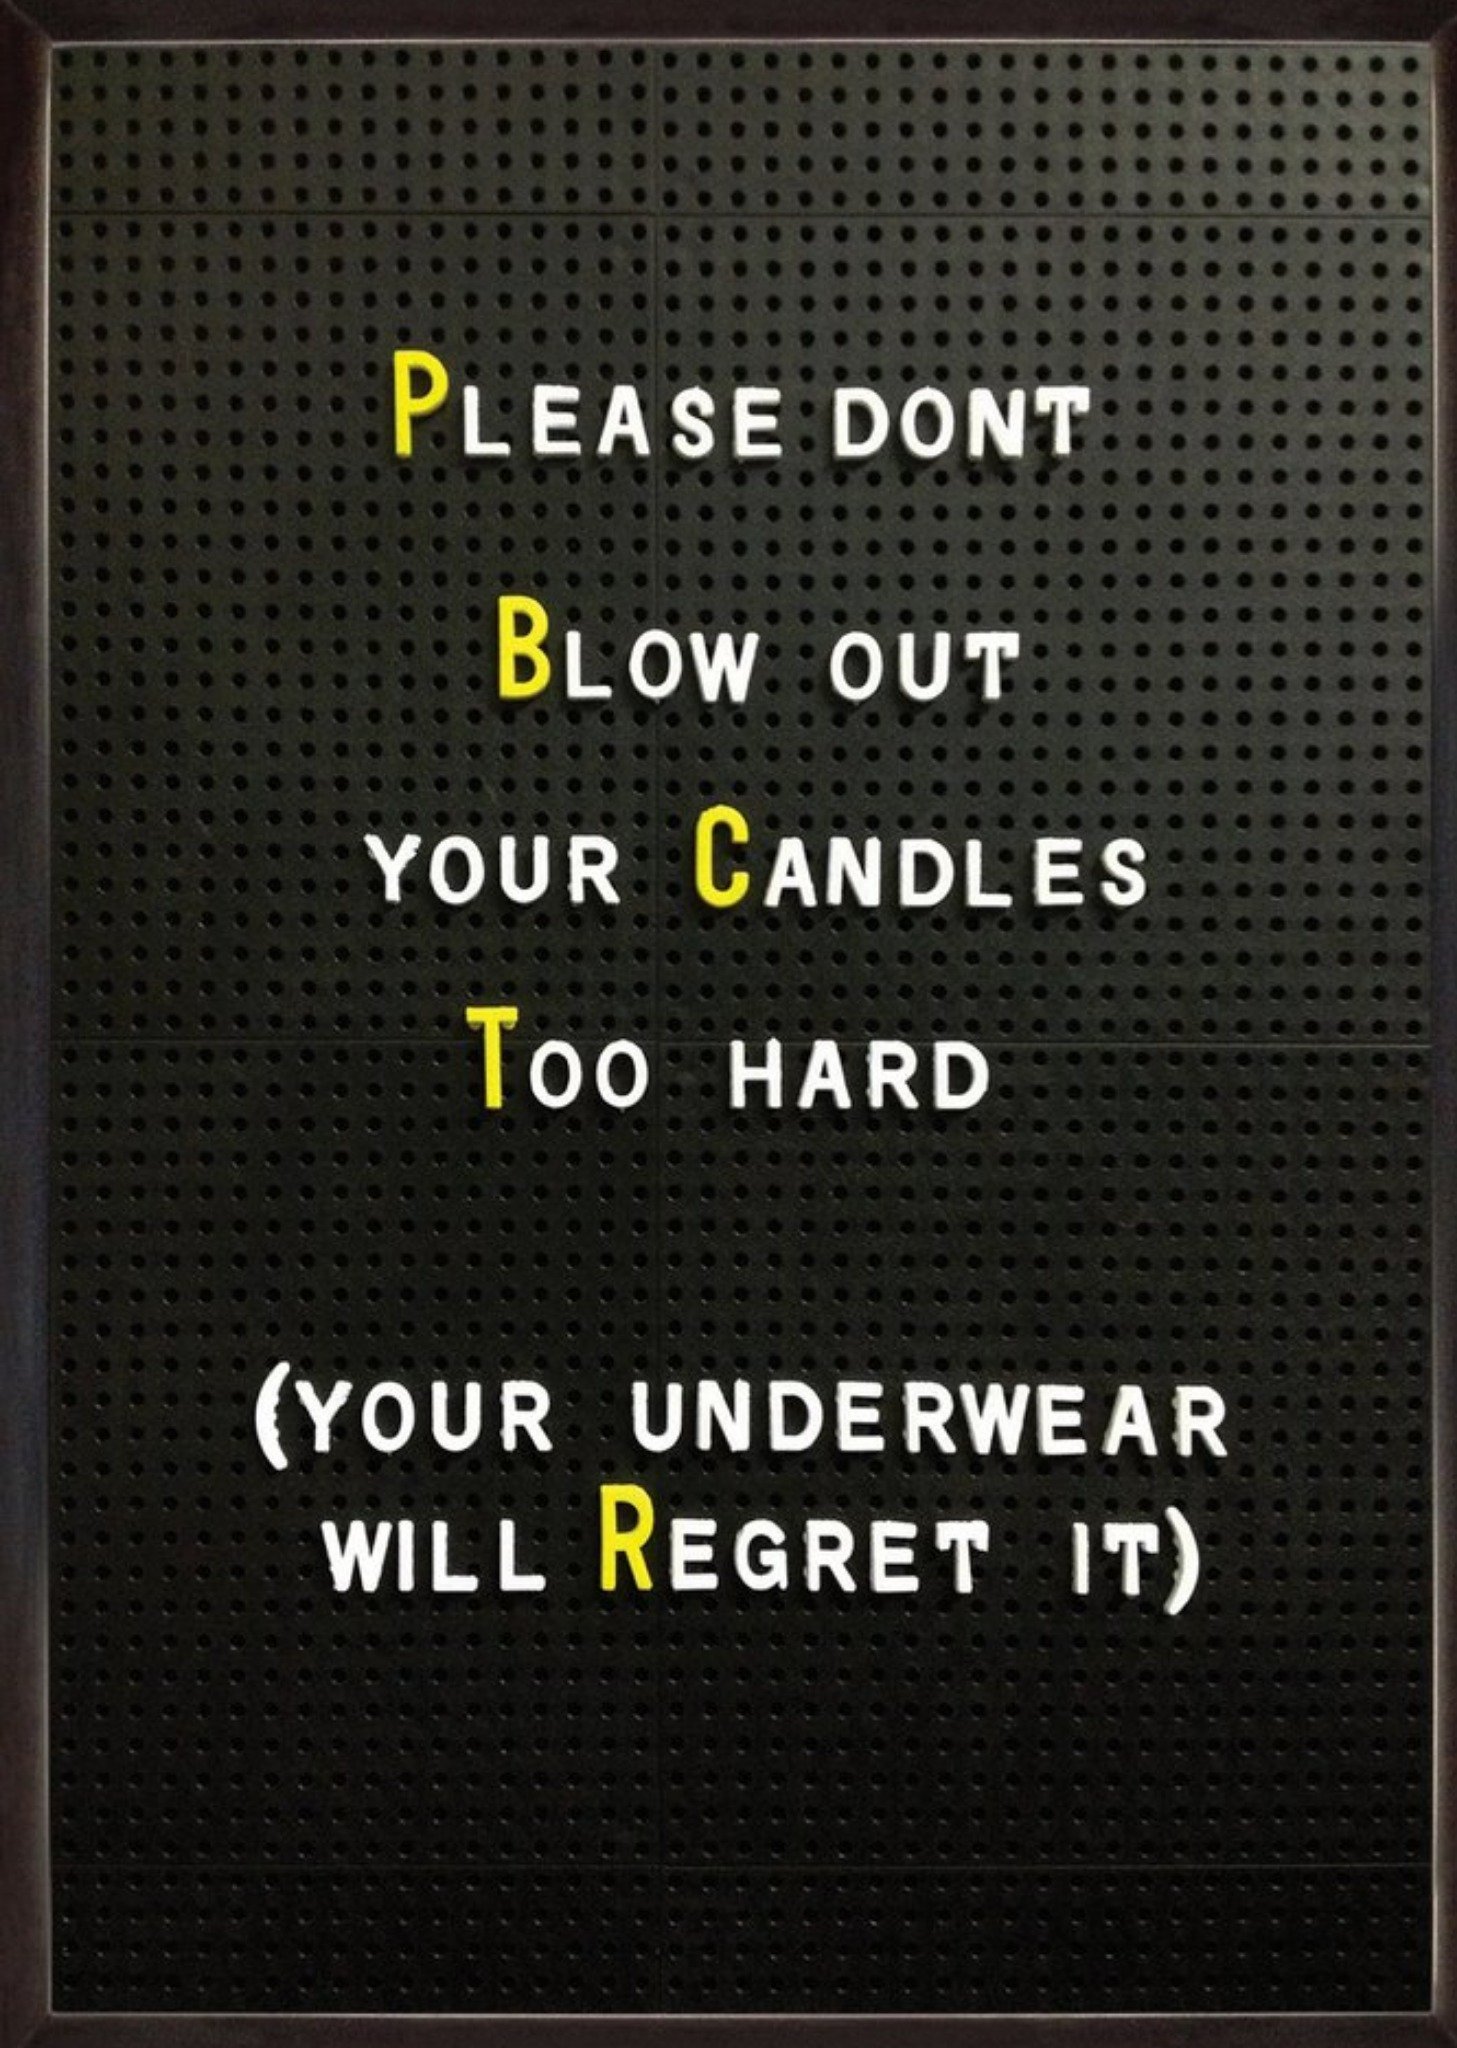 Brainbox Candy Funny Cheeky Old Underwear Don't Blow Too Hard Birthday Card, Large